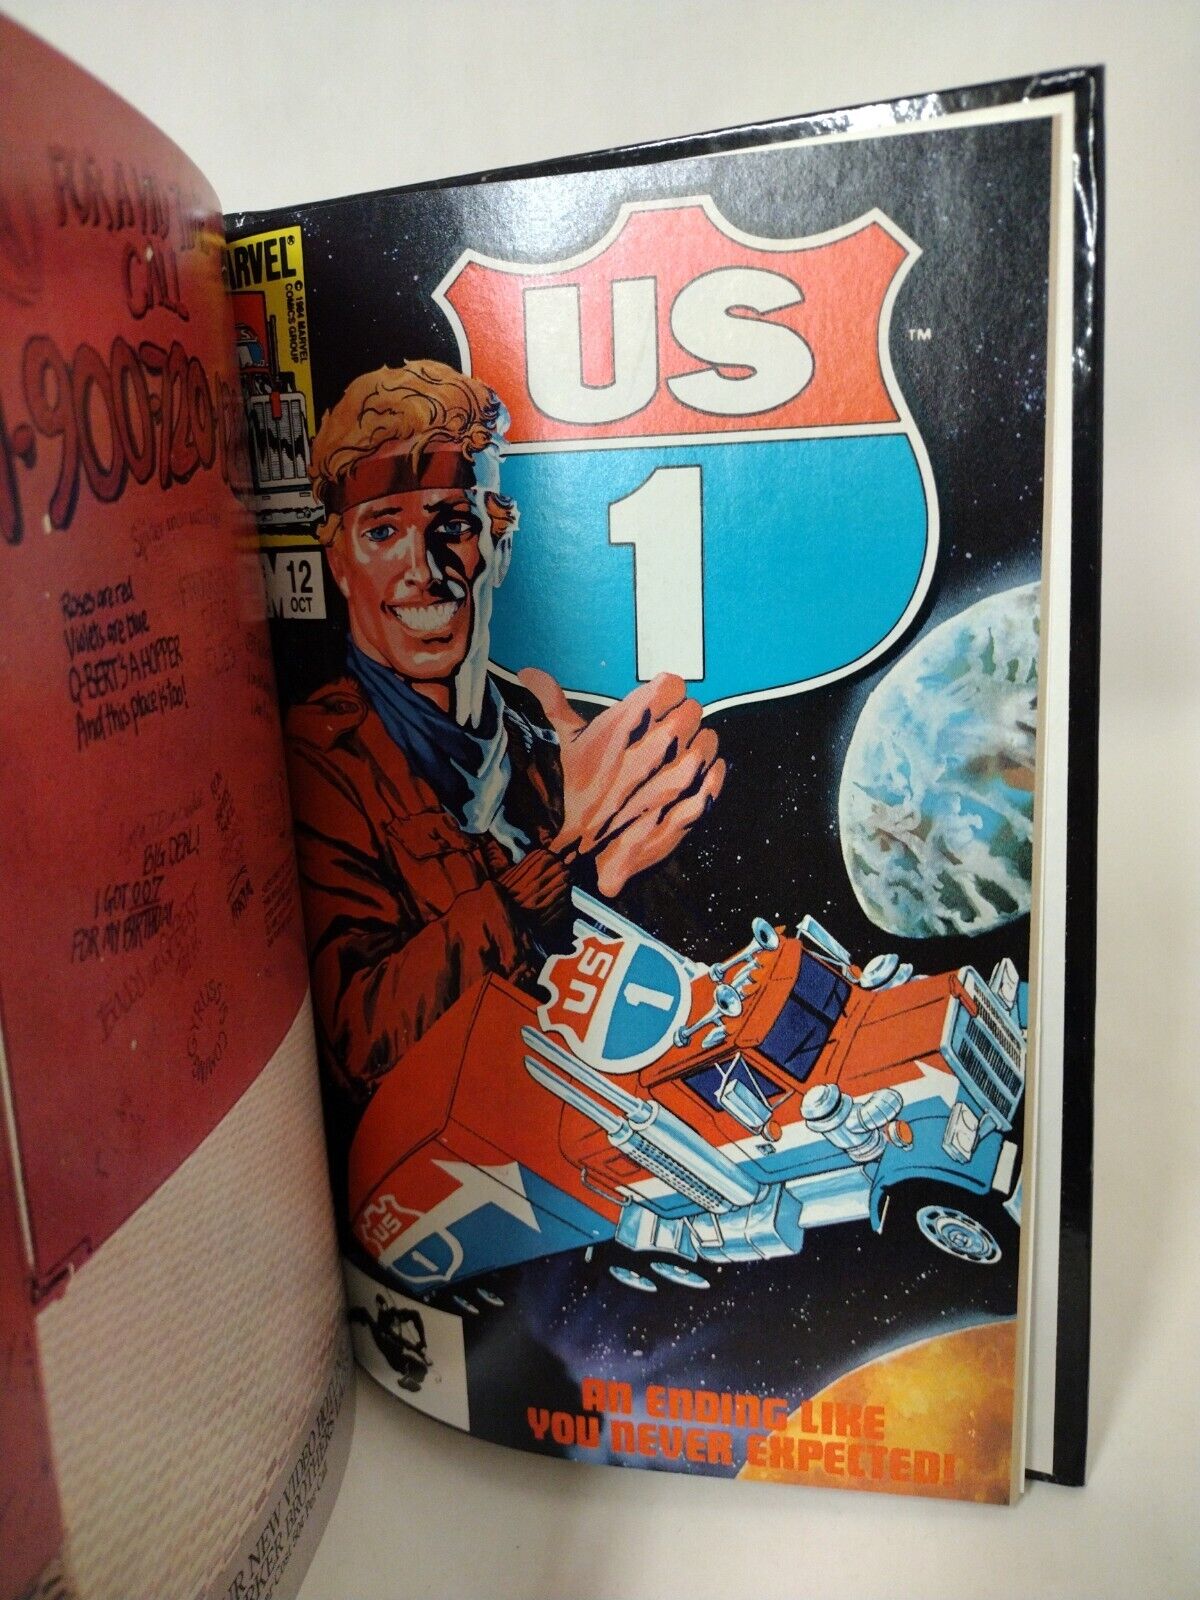 US 1  (1982) Complete Collection ARG #137 Custom Bound Marvel Comic Hardcover